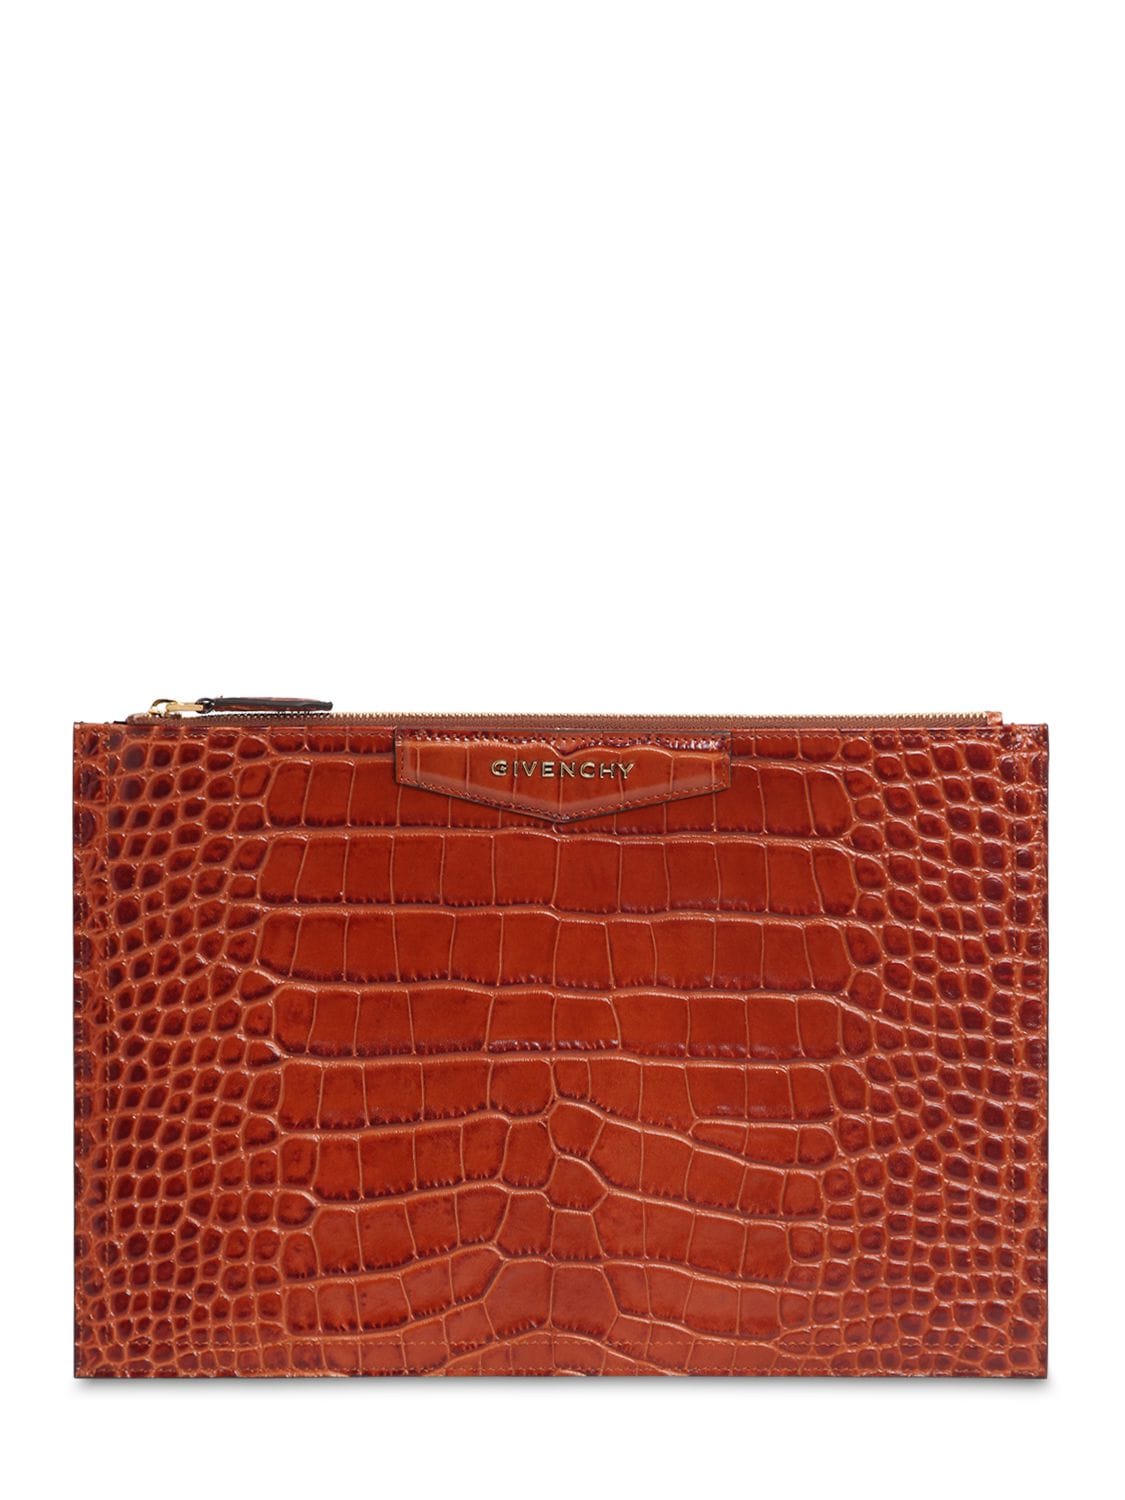 GIVENCHY CROC EMBOSSED LEATHER POUCH,70IA5P027-MJE30